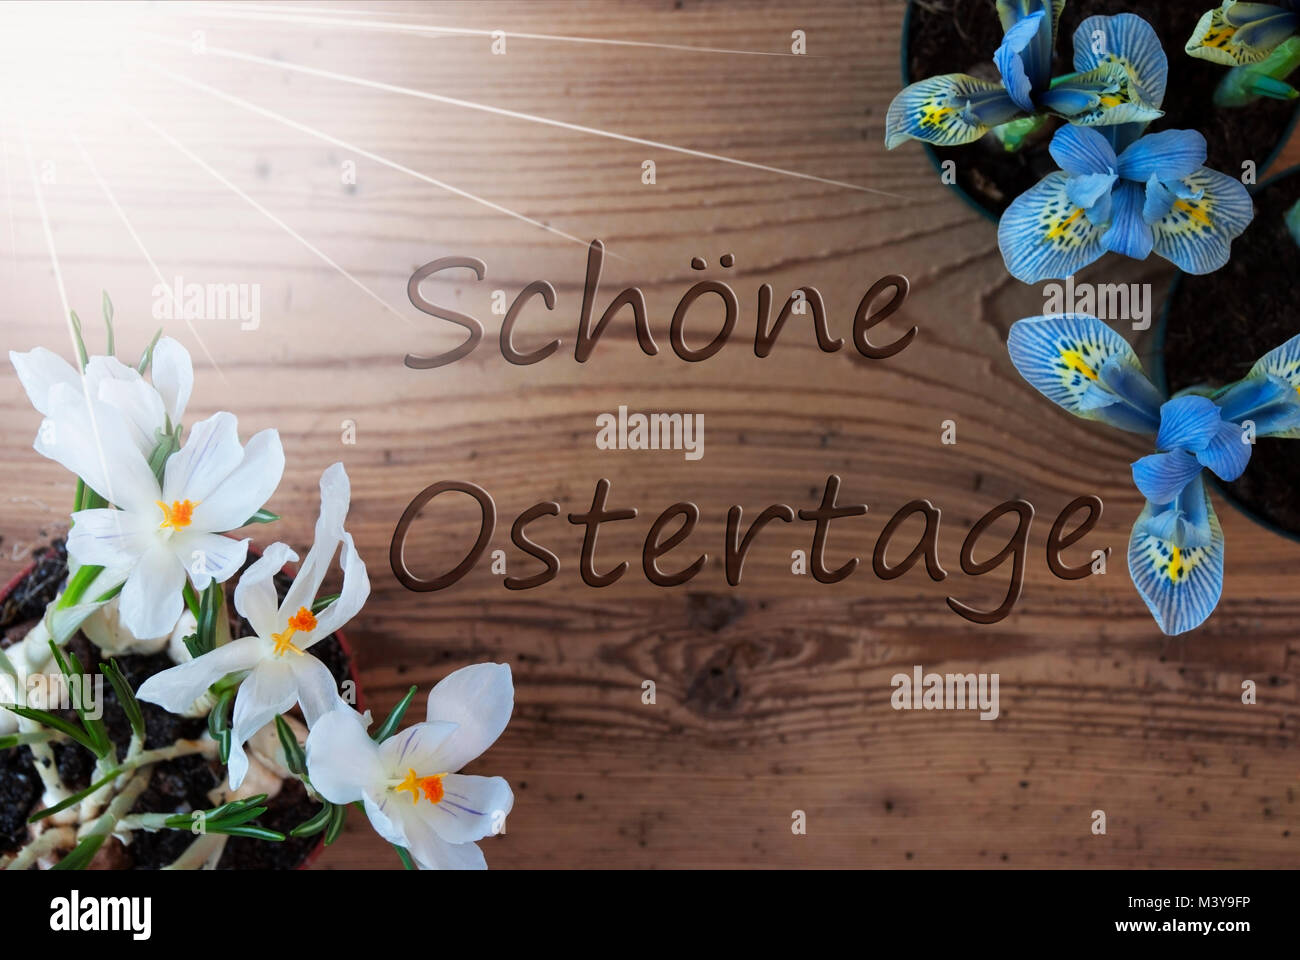 Wooden Background With German Text Schoene Ostertage Means Happy Easter.  Sunny Spring Flowers Like Grape Hyacinth And Crocus. Aged Or Vintage Style  Stock Photo - Alamy